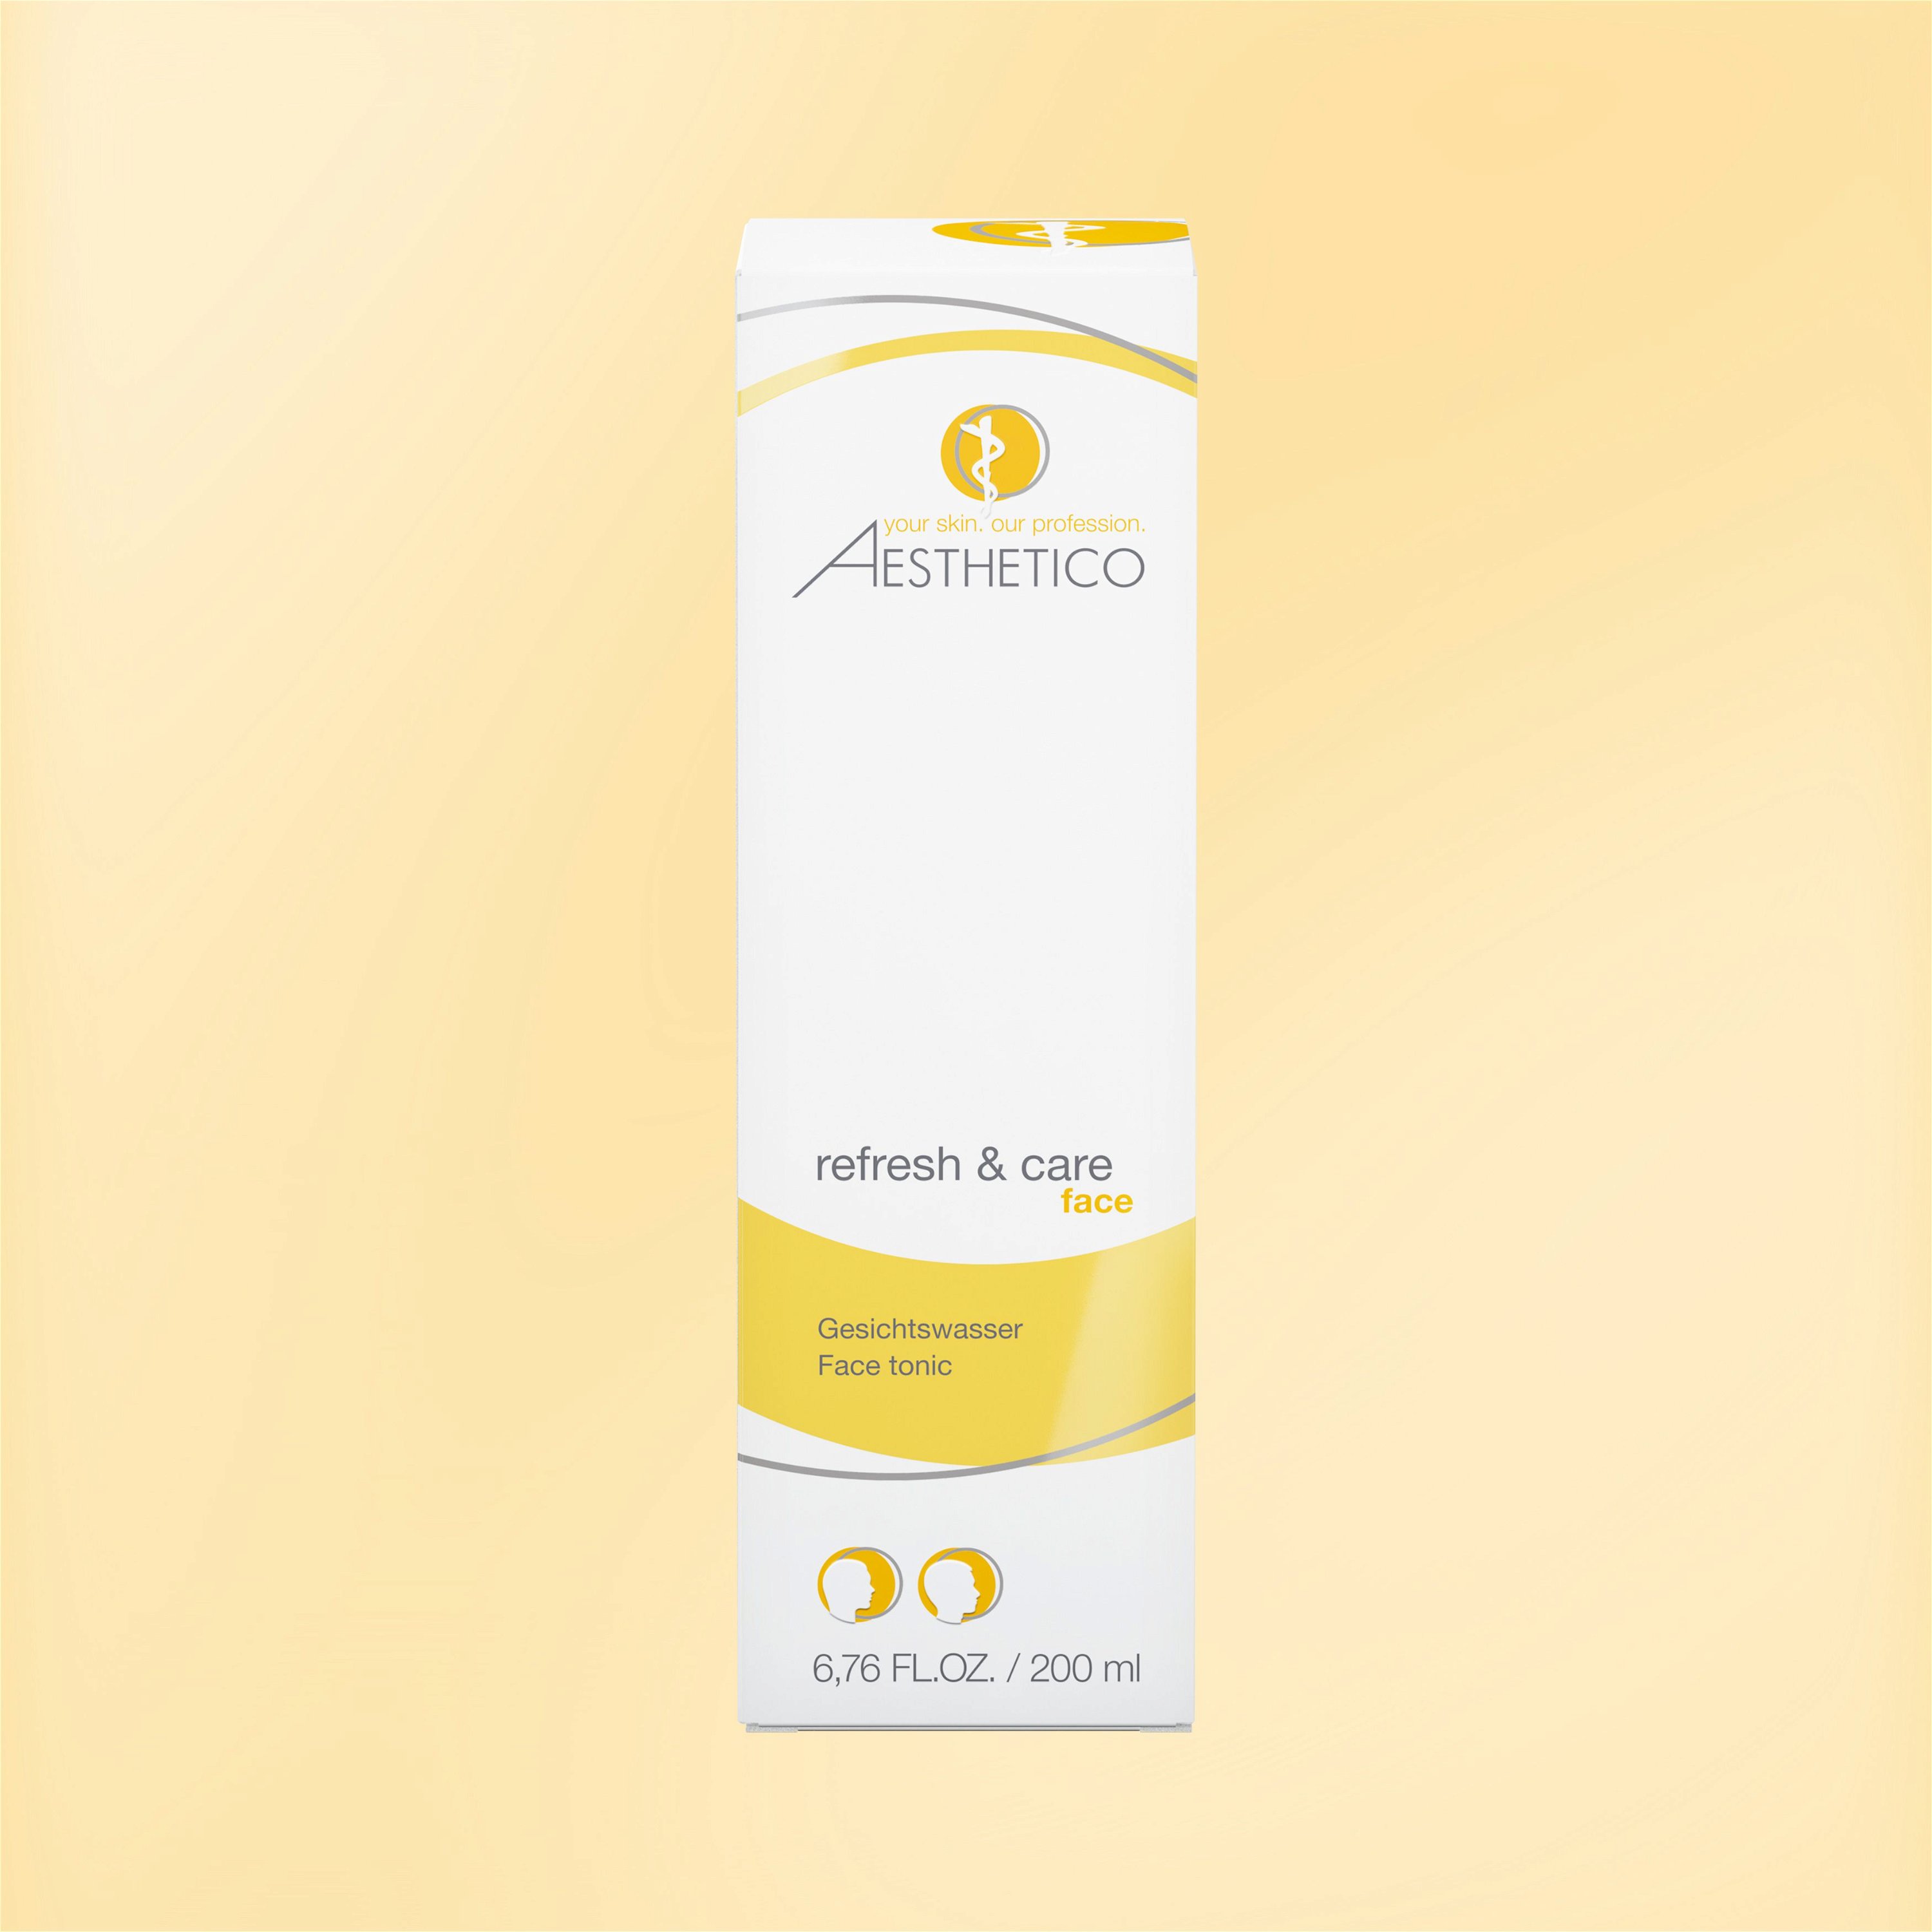 Umverpackung AESTHETICO refresh & care, 200 ml